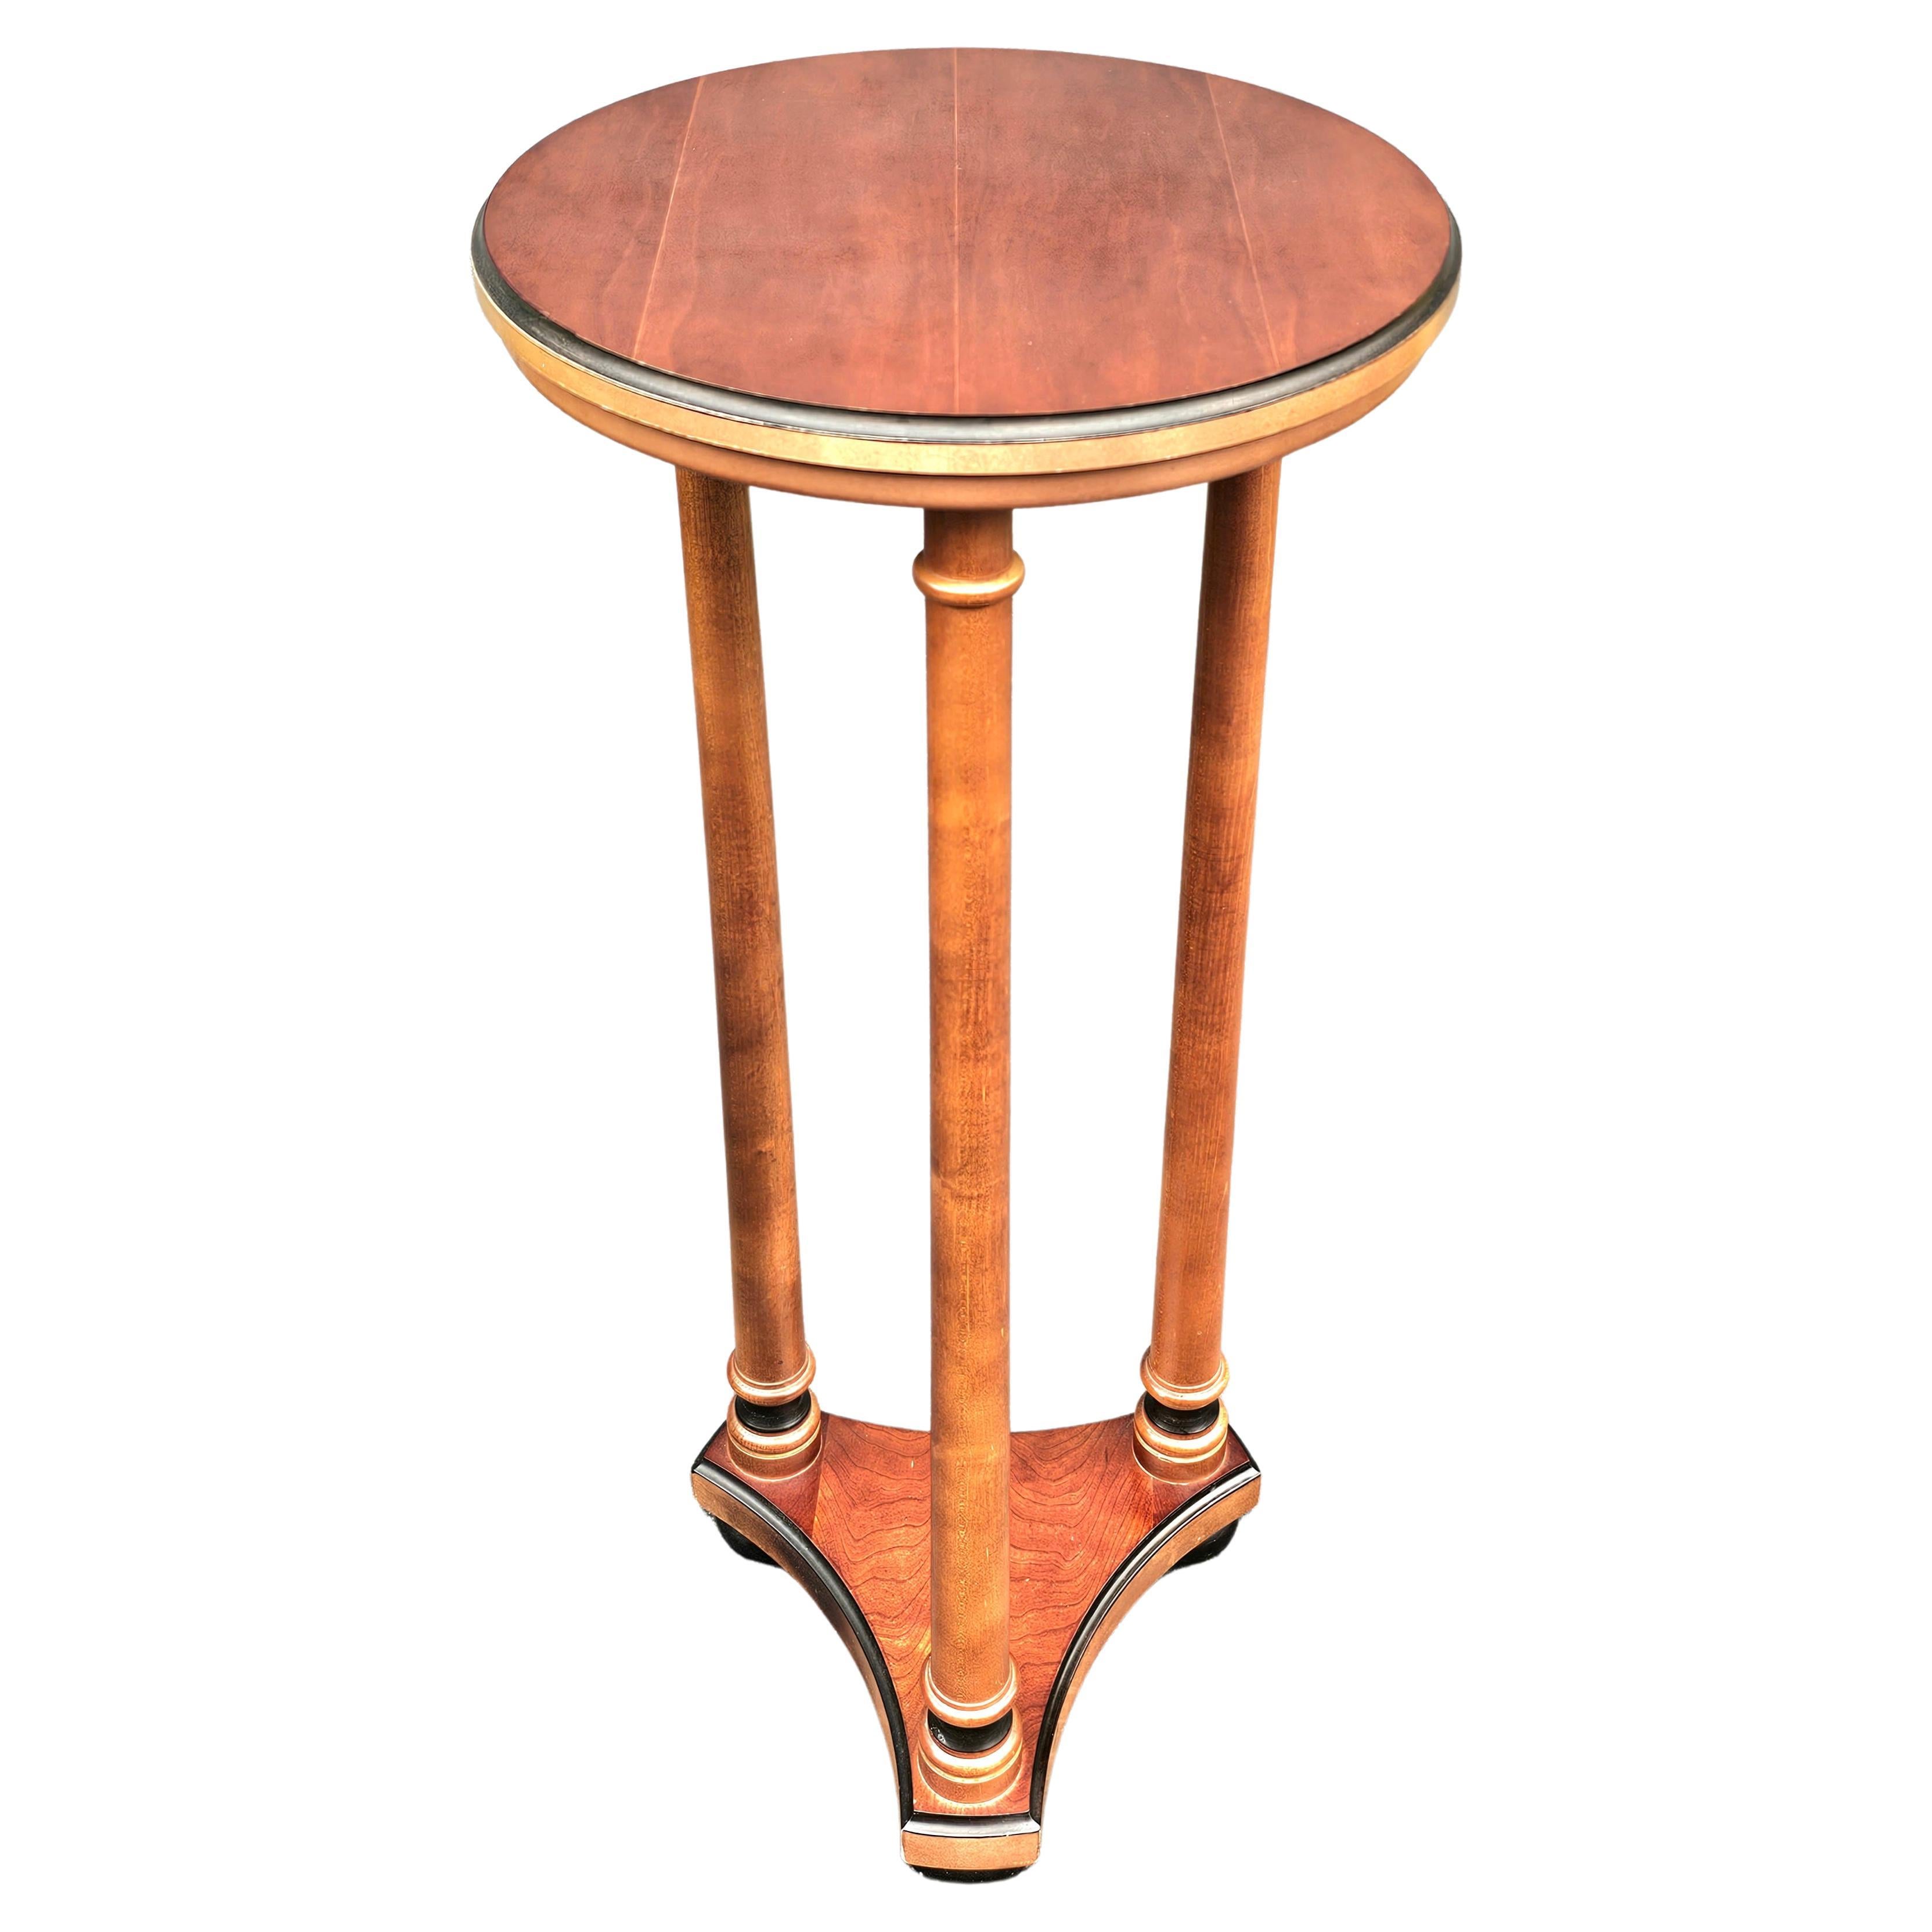 Late 20th Century Empire Style Fruitwood Pedestal Side Table